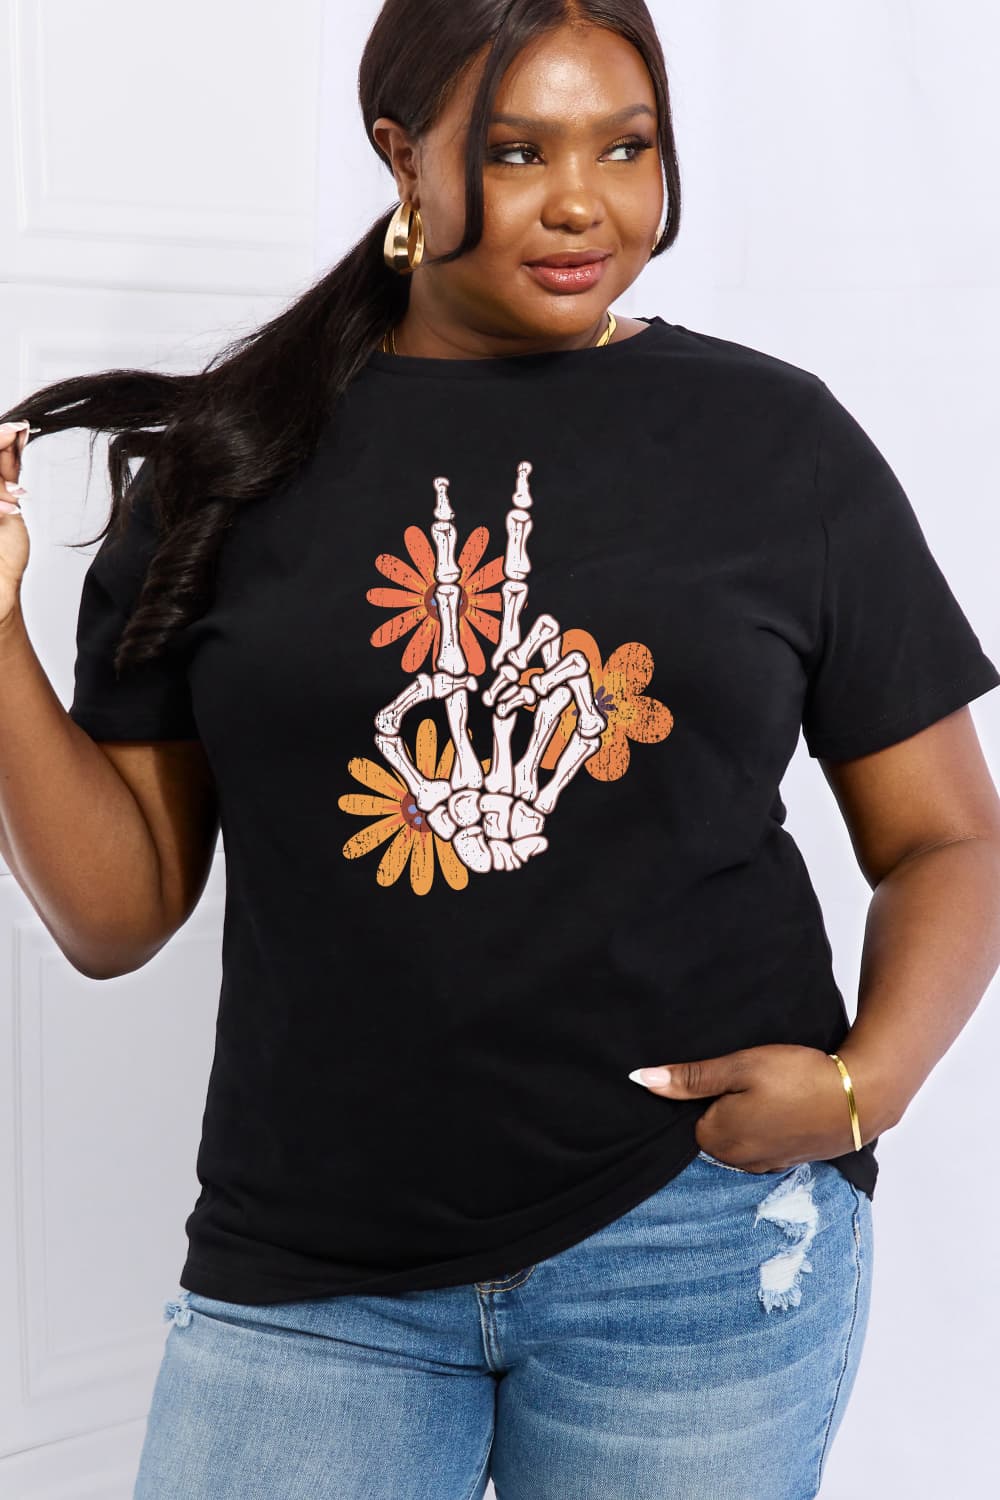 Full Size Skeleton Hand Graphic Cotton Tee - Black / S - T-Shirts - Shirts & Tops - 7 - 2024